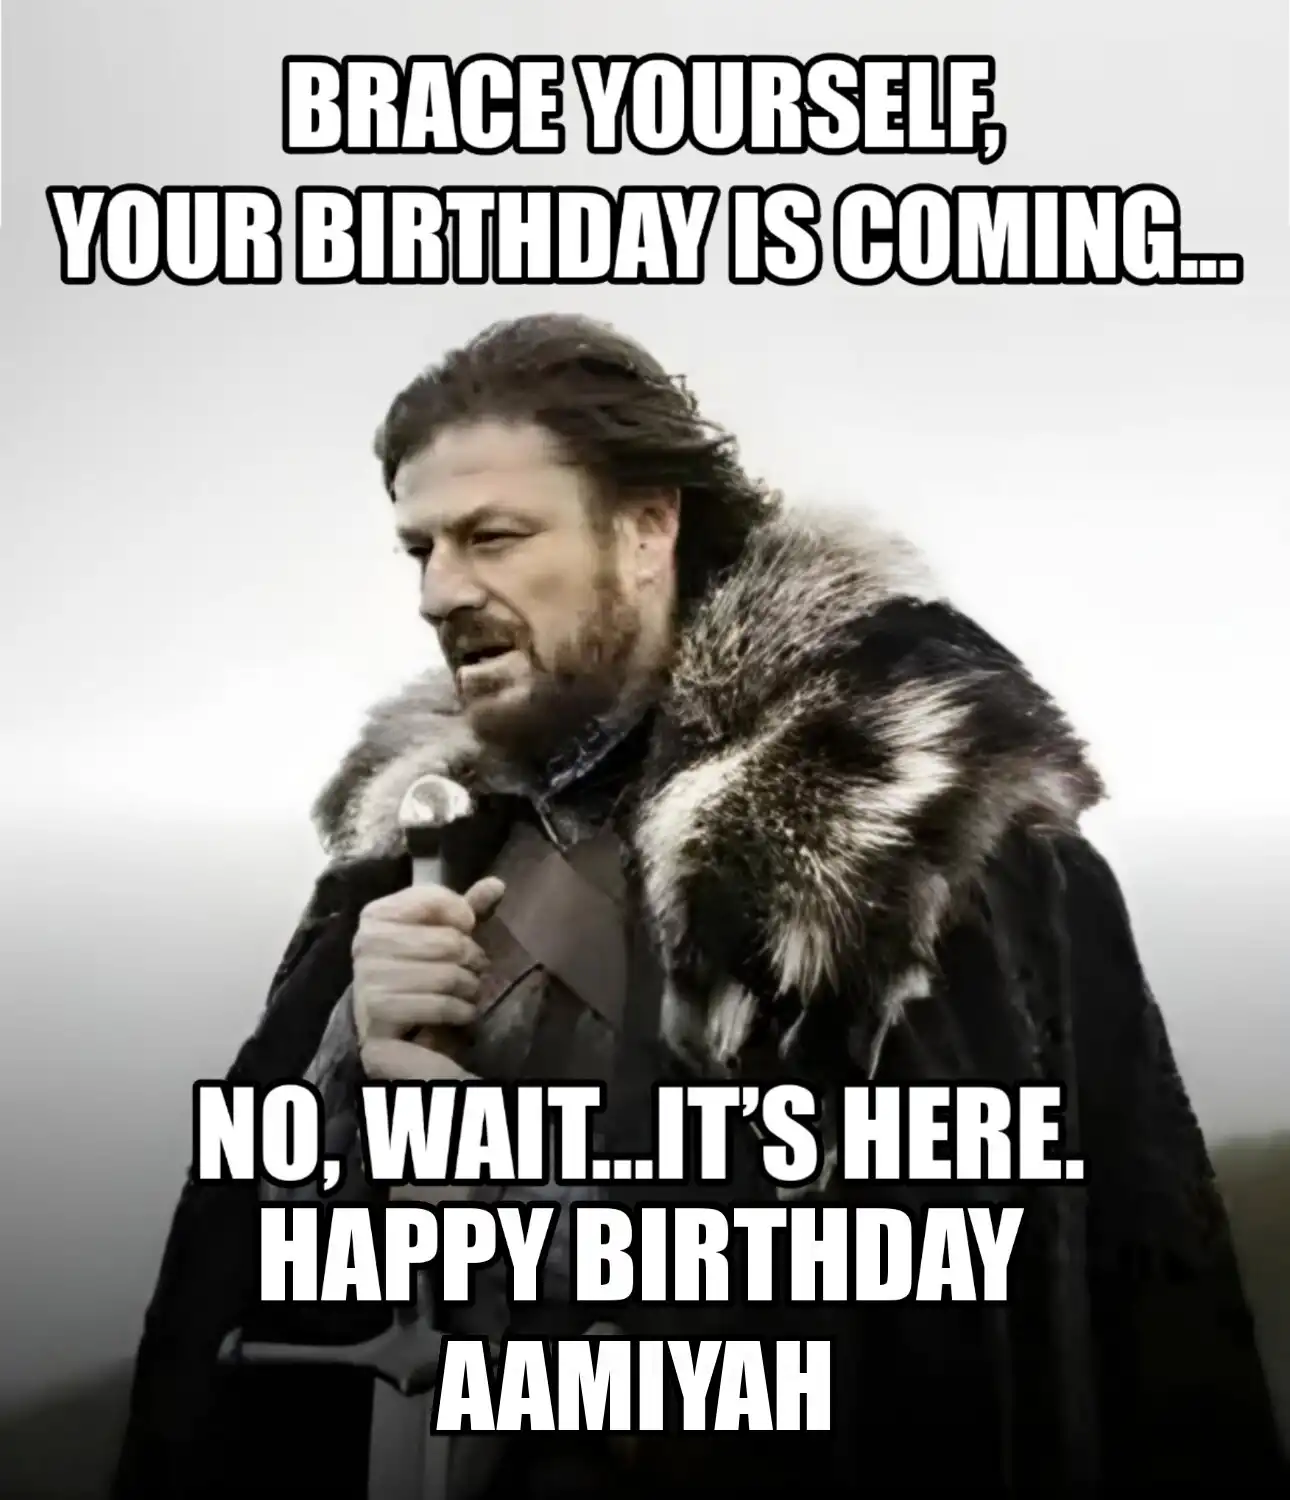 Happy Birthday Aamiyah Brace Yourself Your Birthday Is Coming Meme